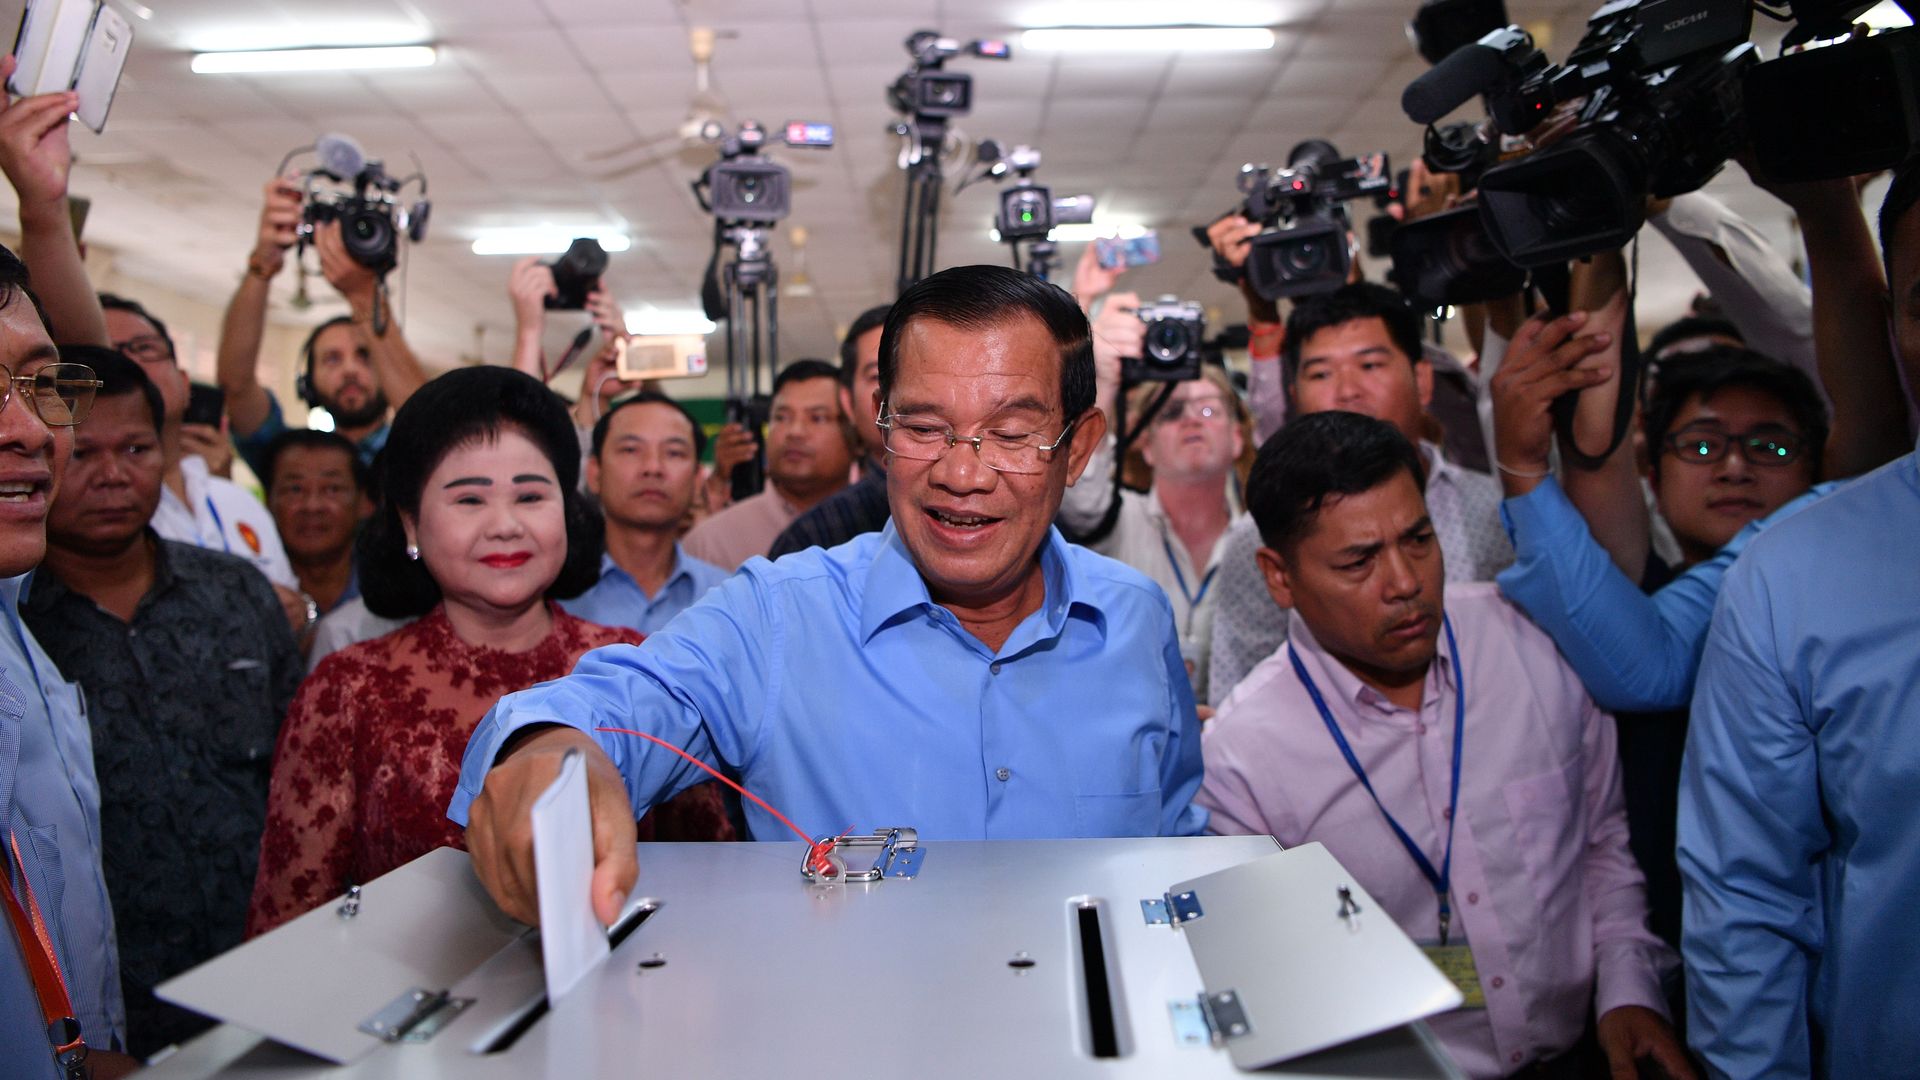 Cambodia's Prime Minister Hun Sen casts his vote during the general elections on Sunday. Photo: Manan Vatsyayana/AFP/Getty Images